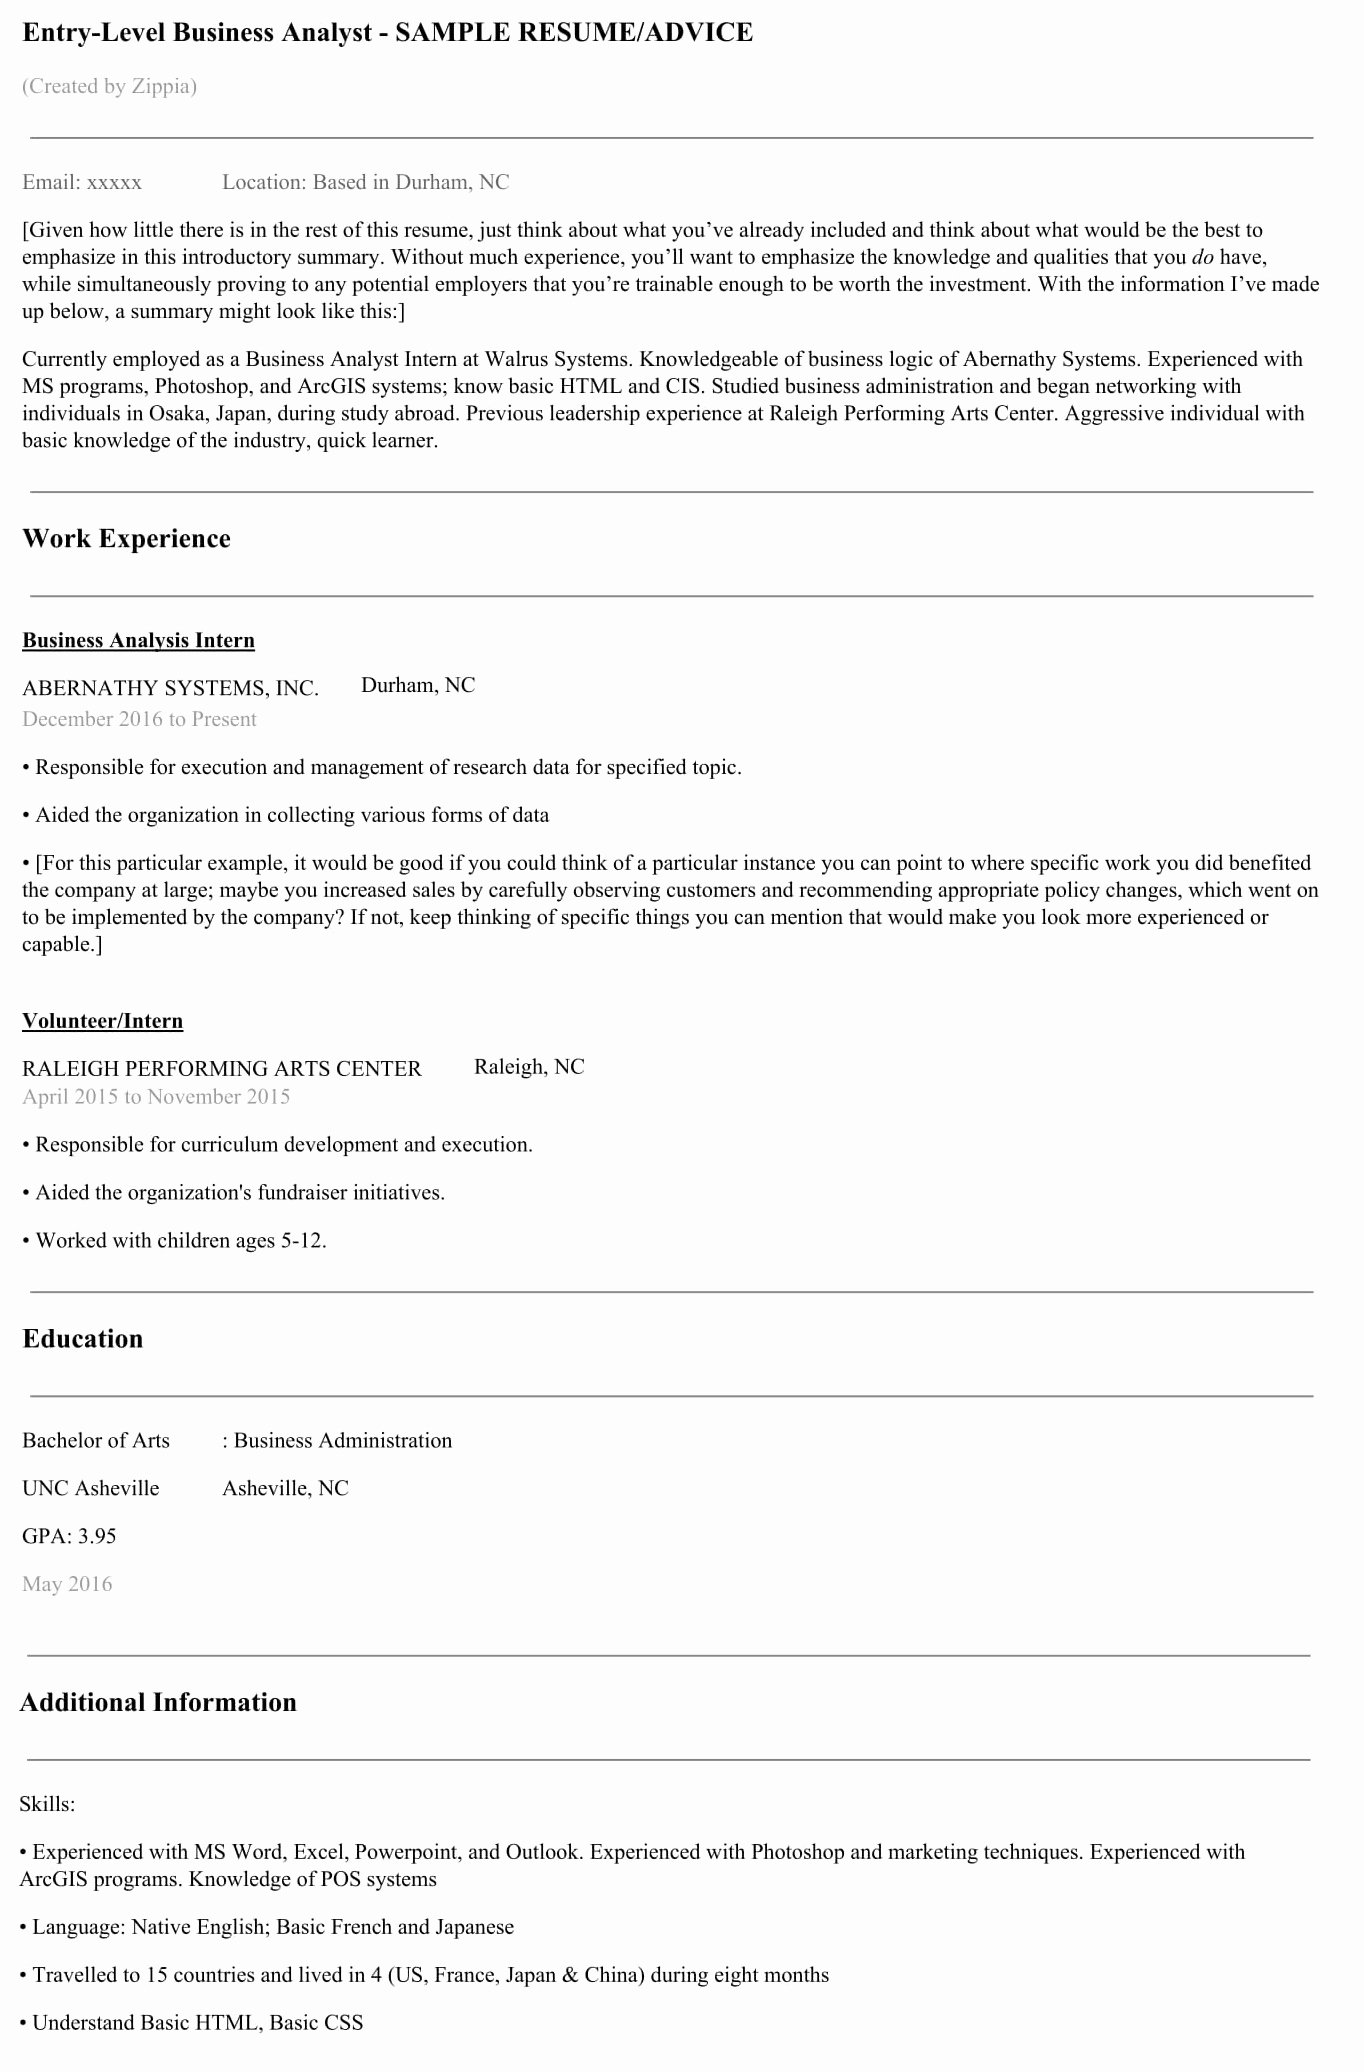 Entry Level Business Analyst Resume Beautiful How to Write the Perfect Business Analyst Resume Zippia